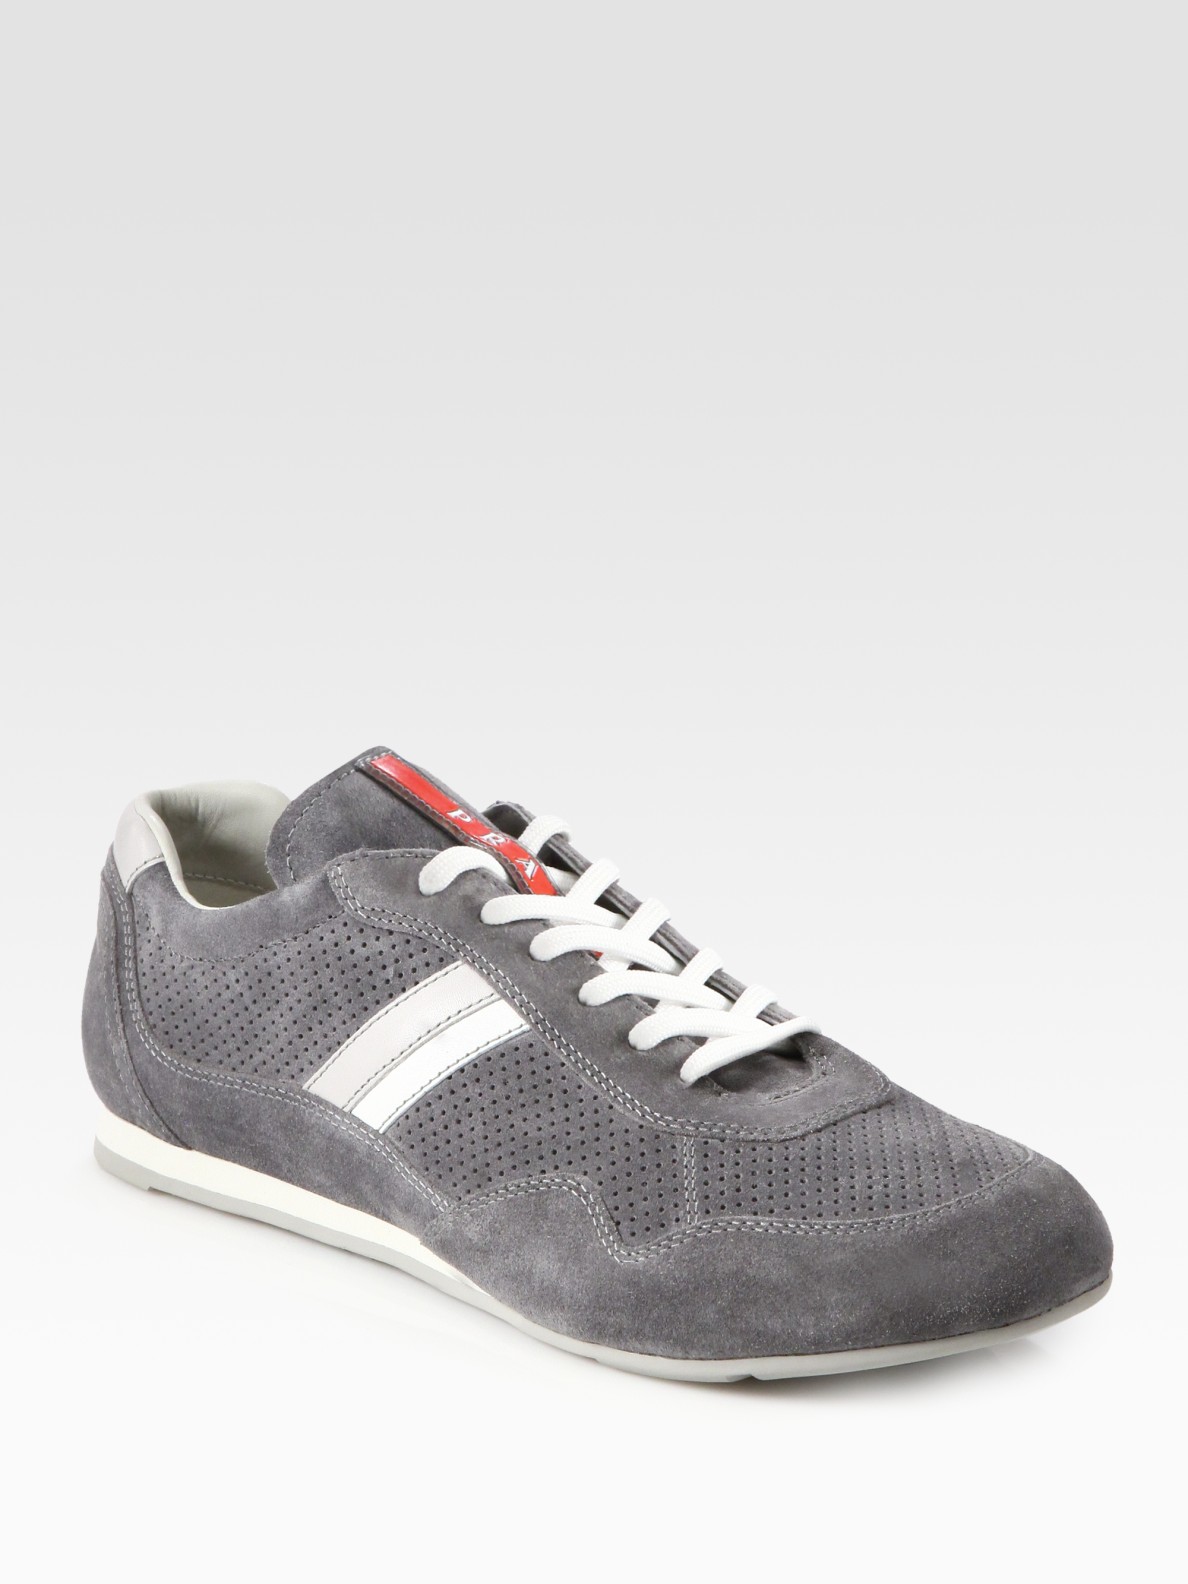 Lyst - Prada Suede Leather Lace Up Sneakers in Gray for Men